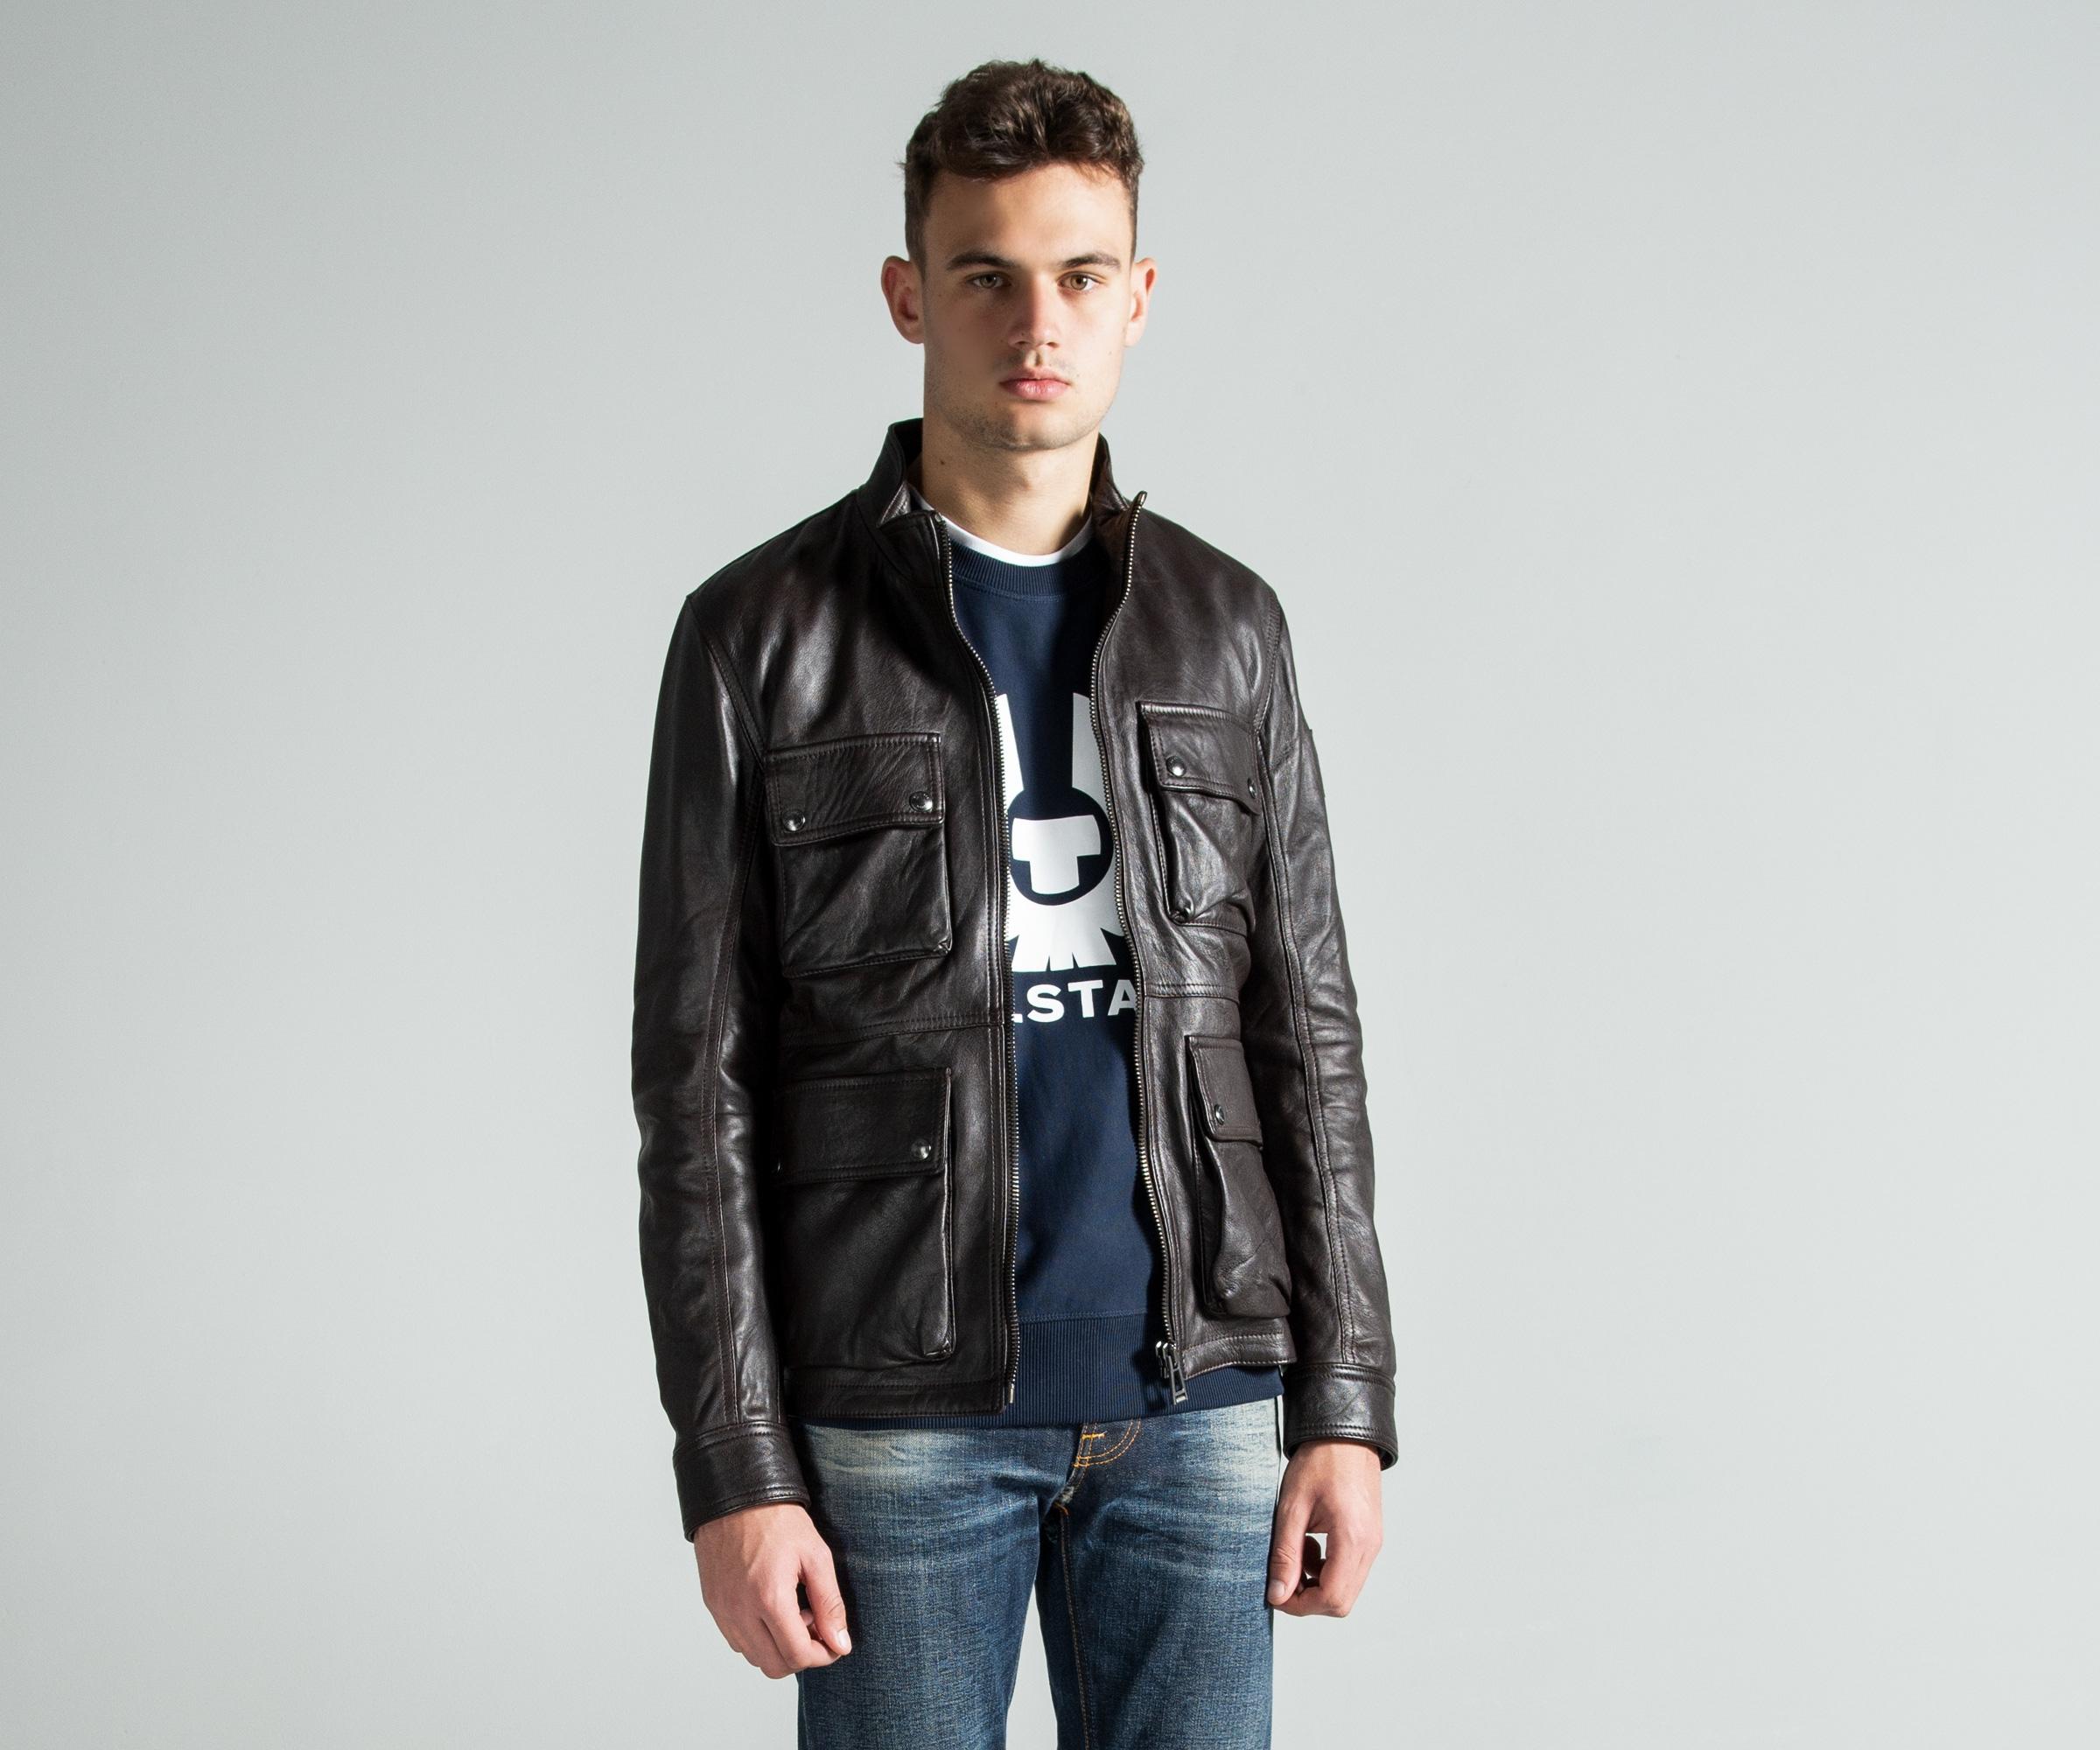 Pockets 'new Brad' Leather Jacket Brown for Men - Lyst